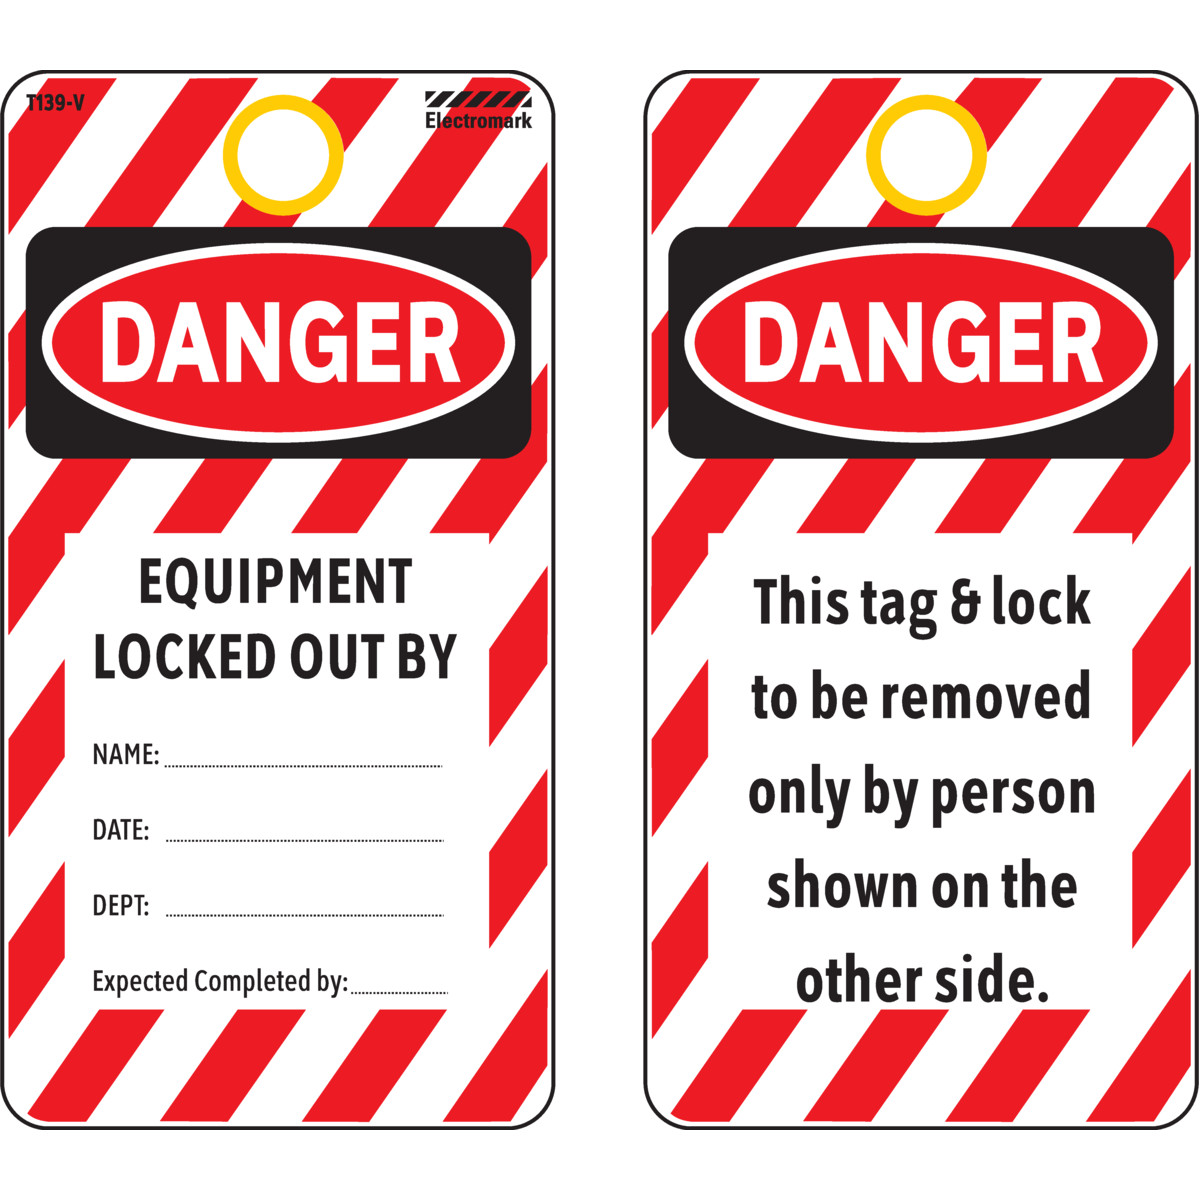 OSHA Danger Equipment Locked Out By Tag - Vinyl